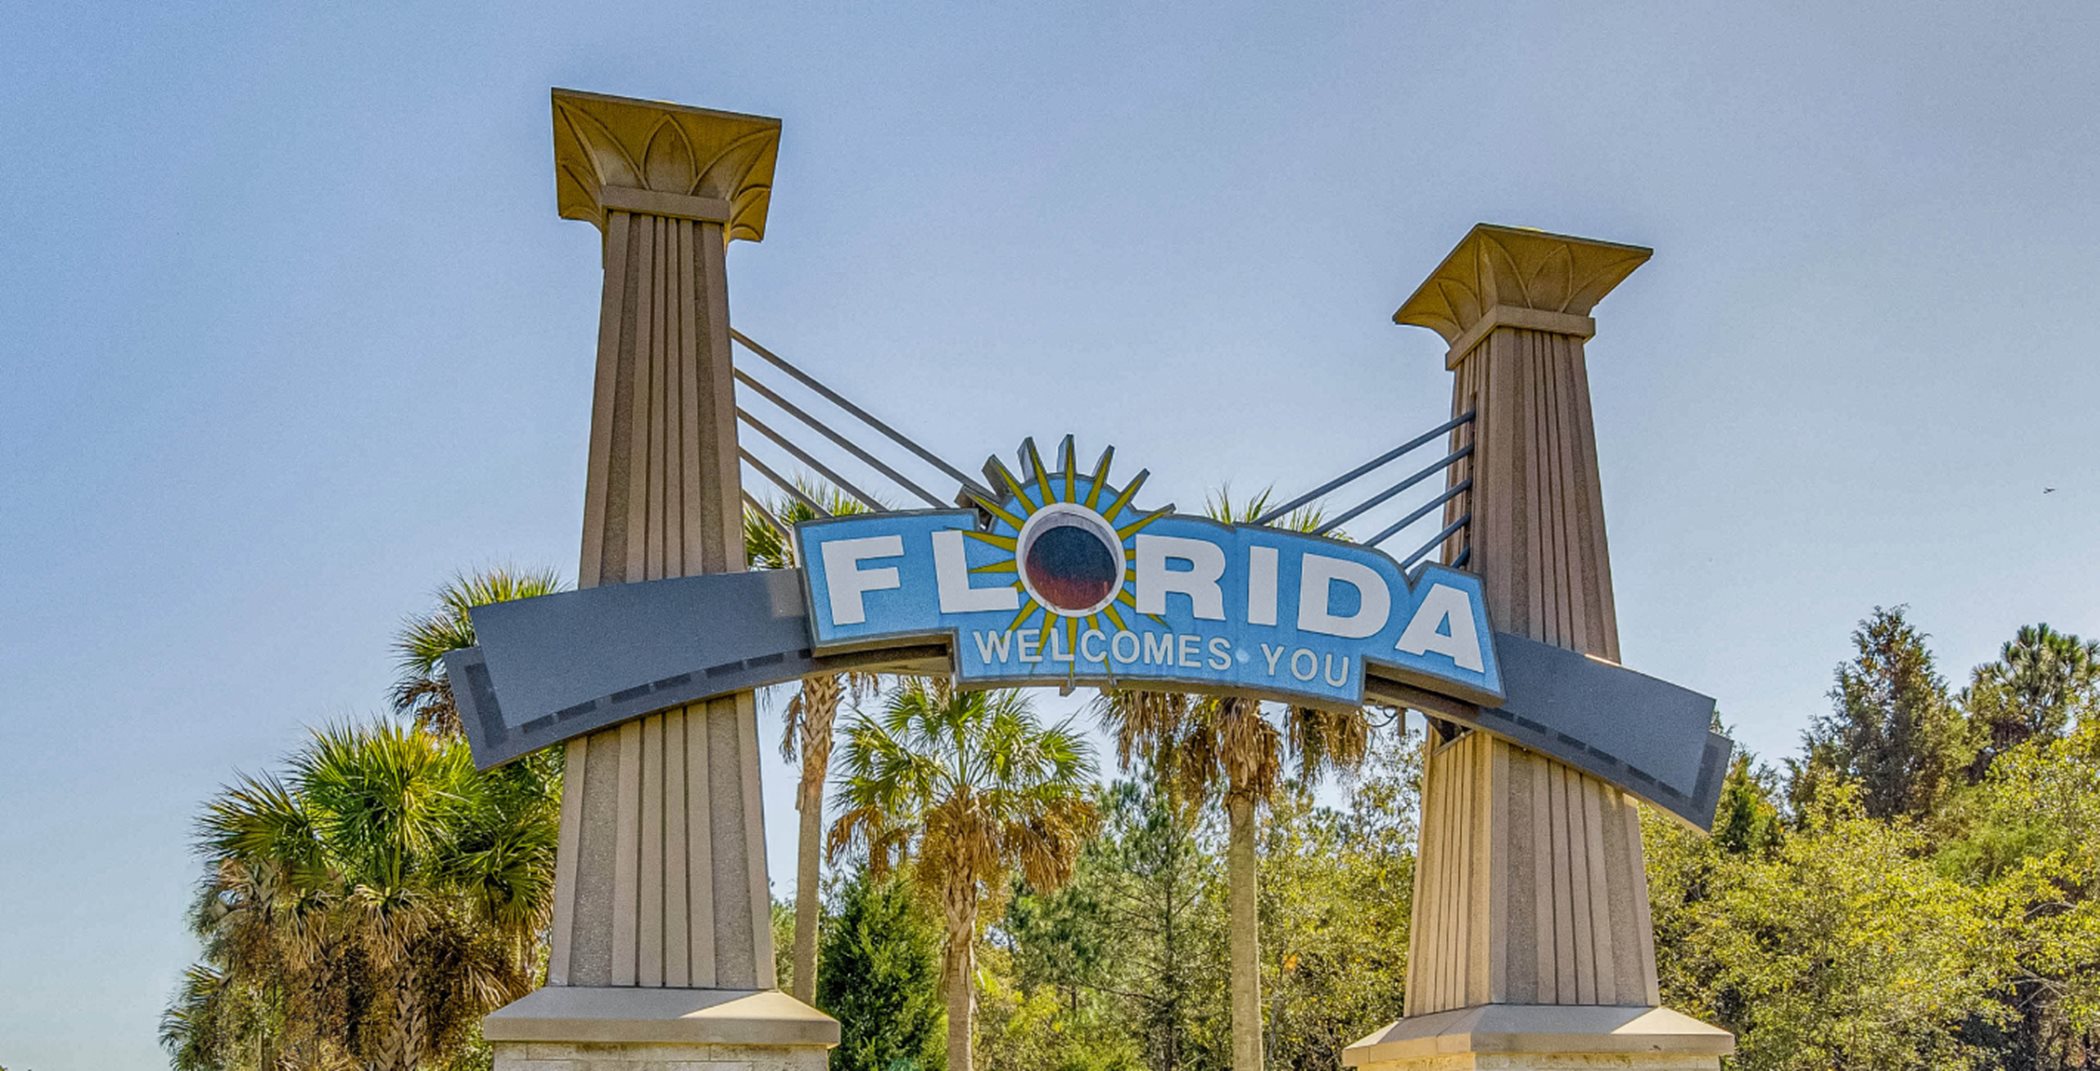 Welcome to Florida sign off of highway